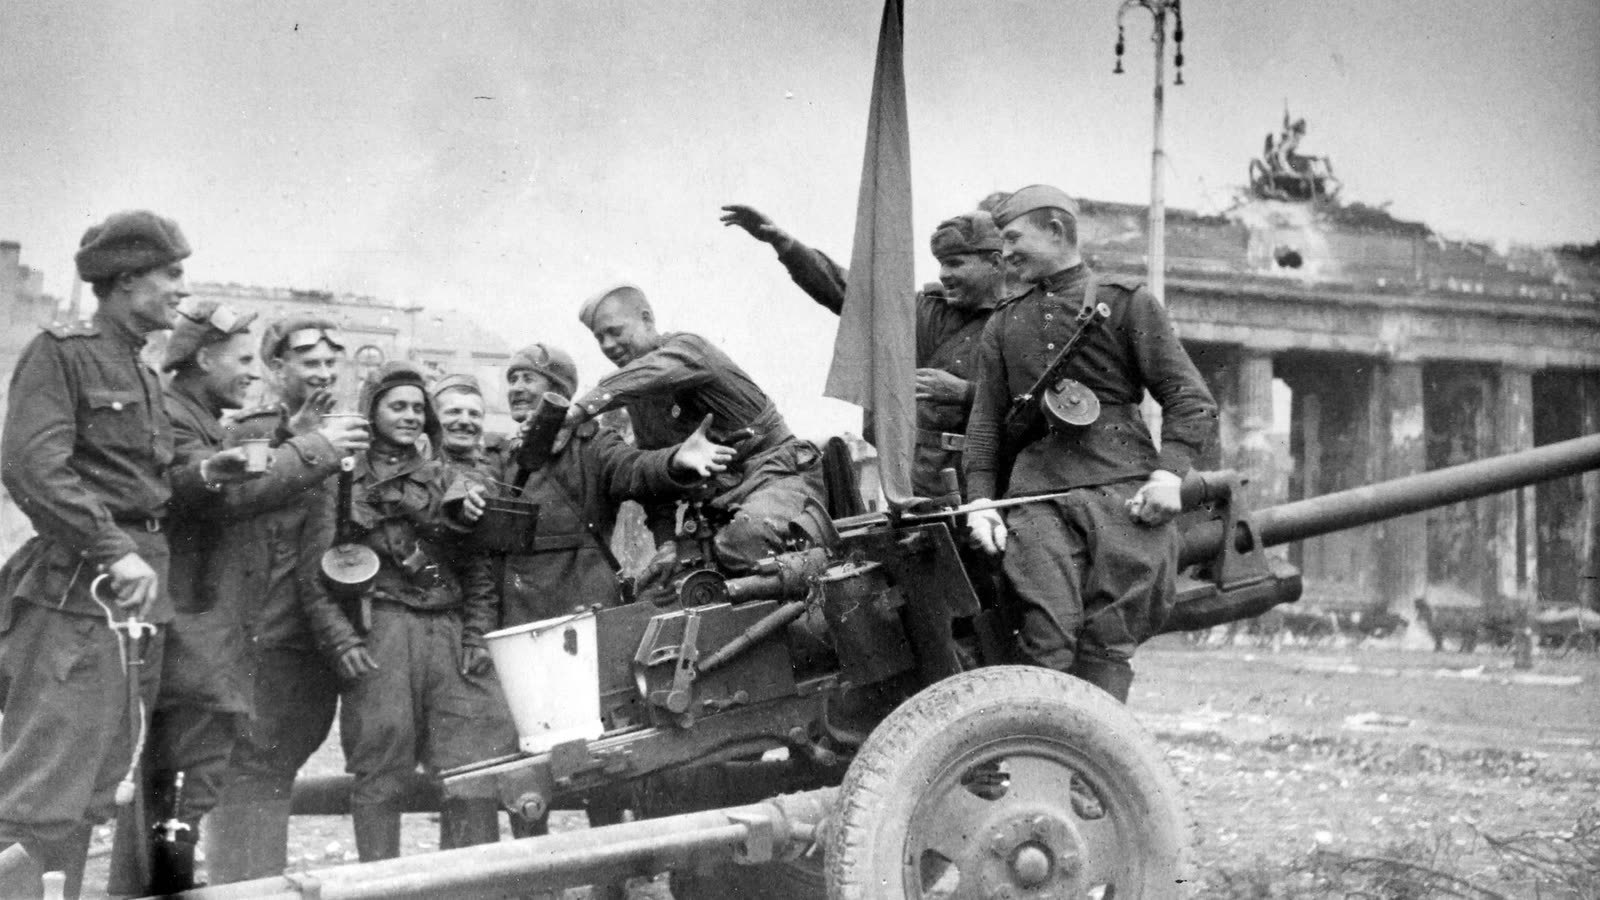 Exactly 80 years ago, one of the best artillery guns of the Second World War was adopted - the 76-mm divisional gun ZiS-3 - The Great Patriotic War, Zis-3, Artillery, Gunners, Historical photo, The Second World War, Longpost, On this day, Weapon of Victory